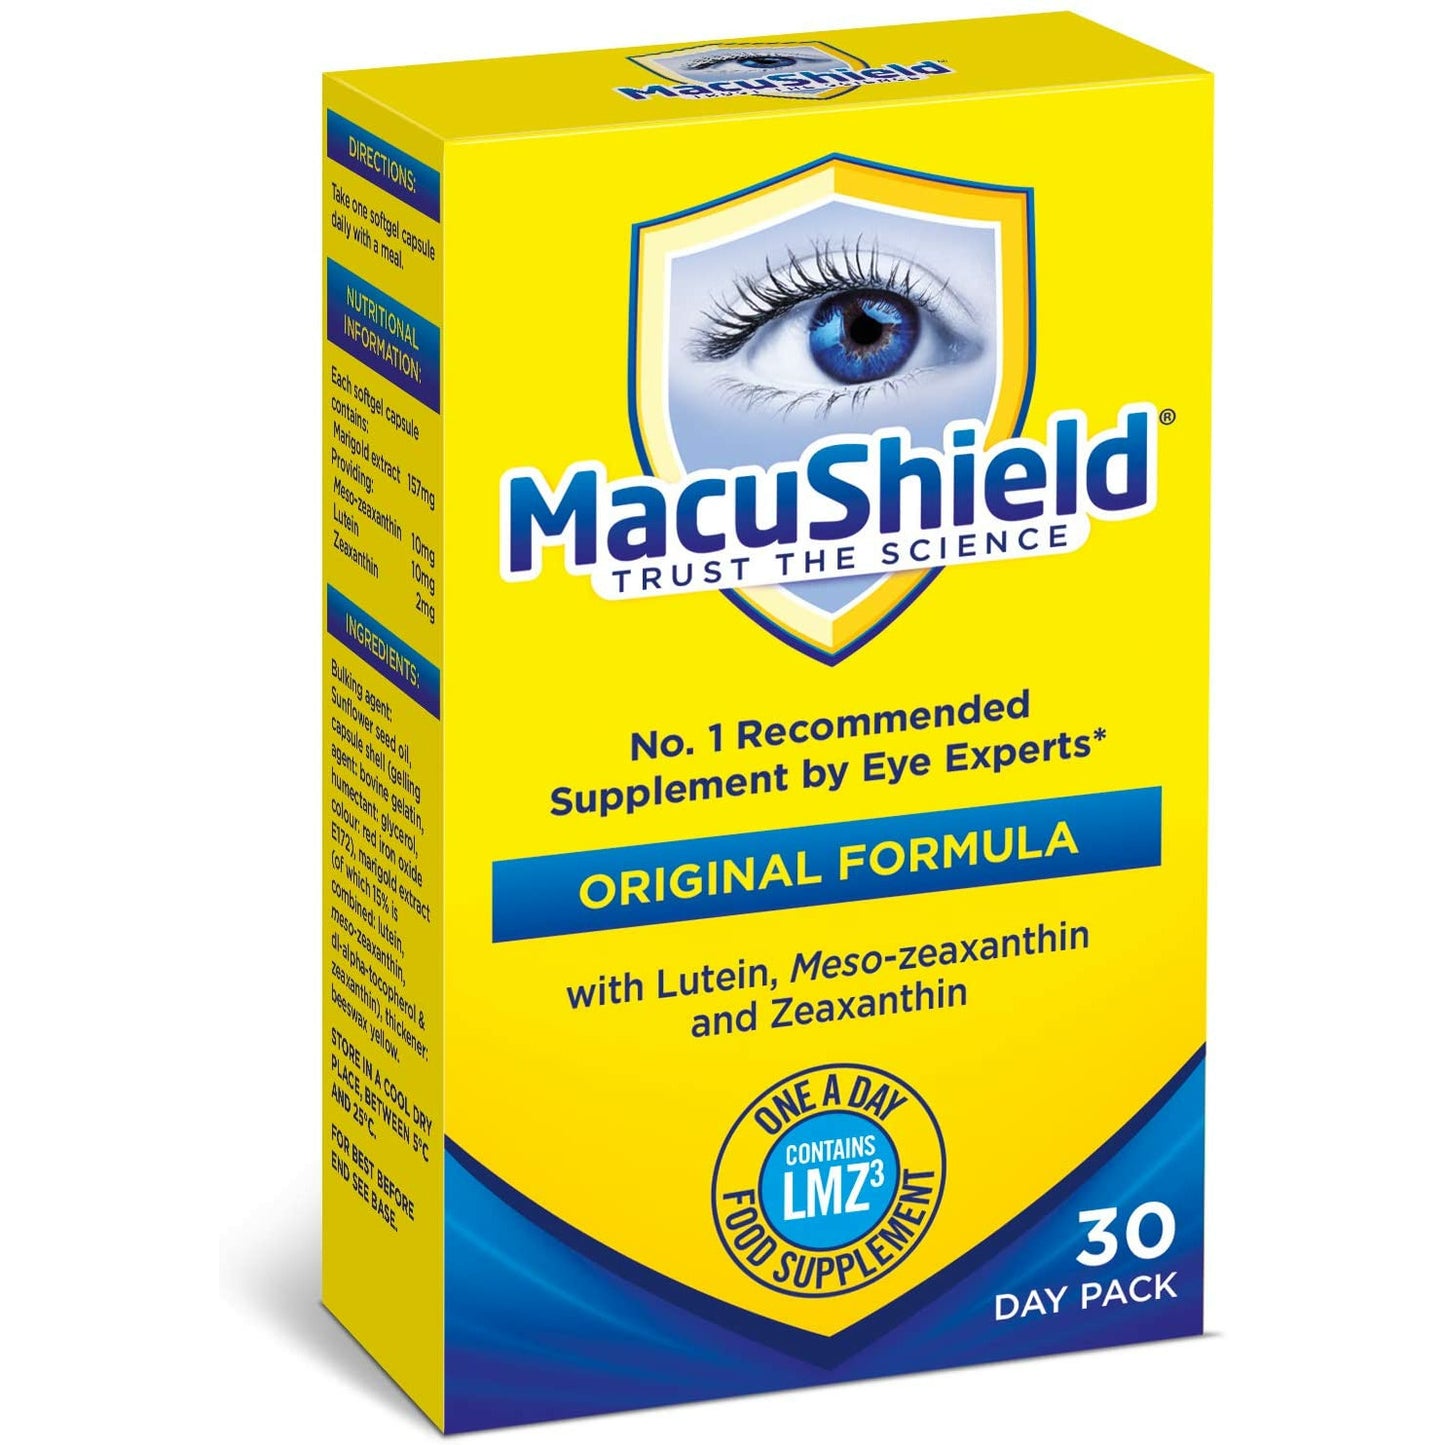 Macushield 30 Caps - UK's Most Recommended Eye Supplement